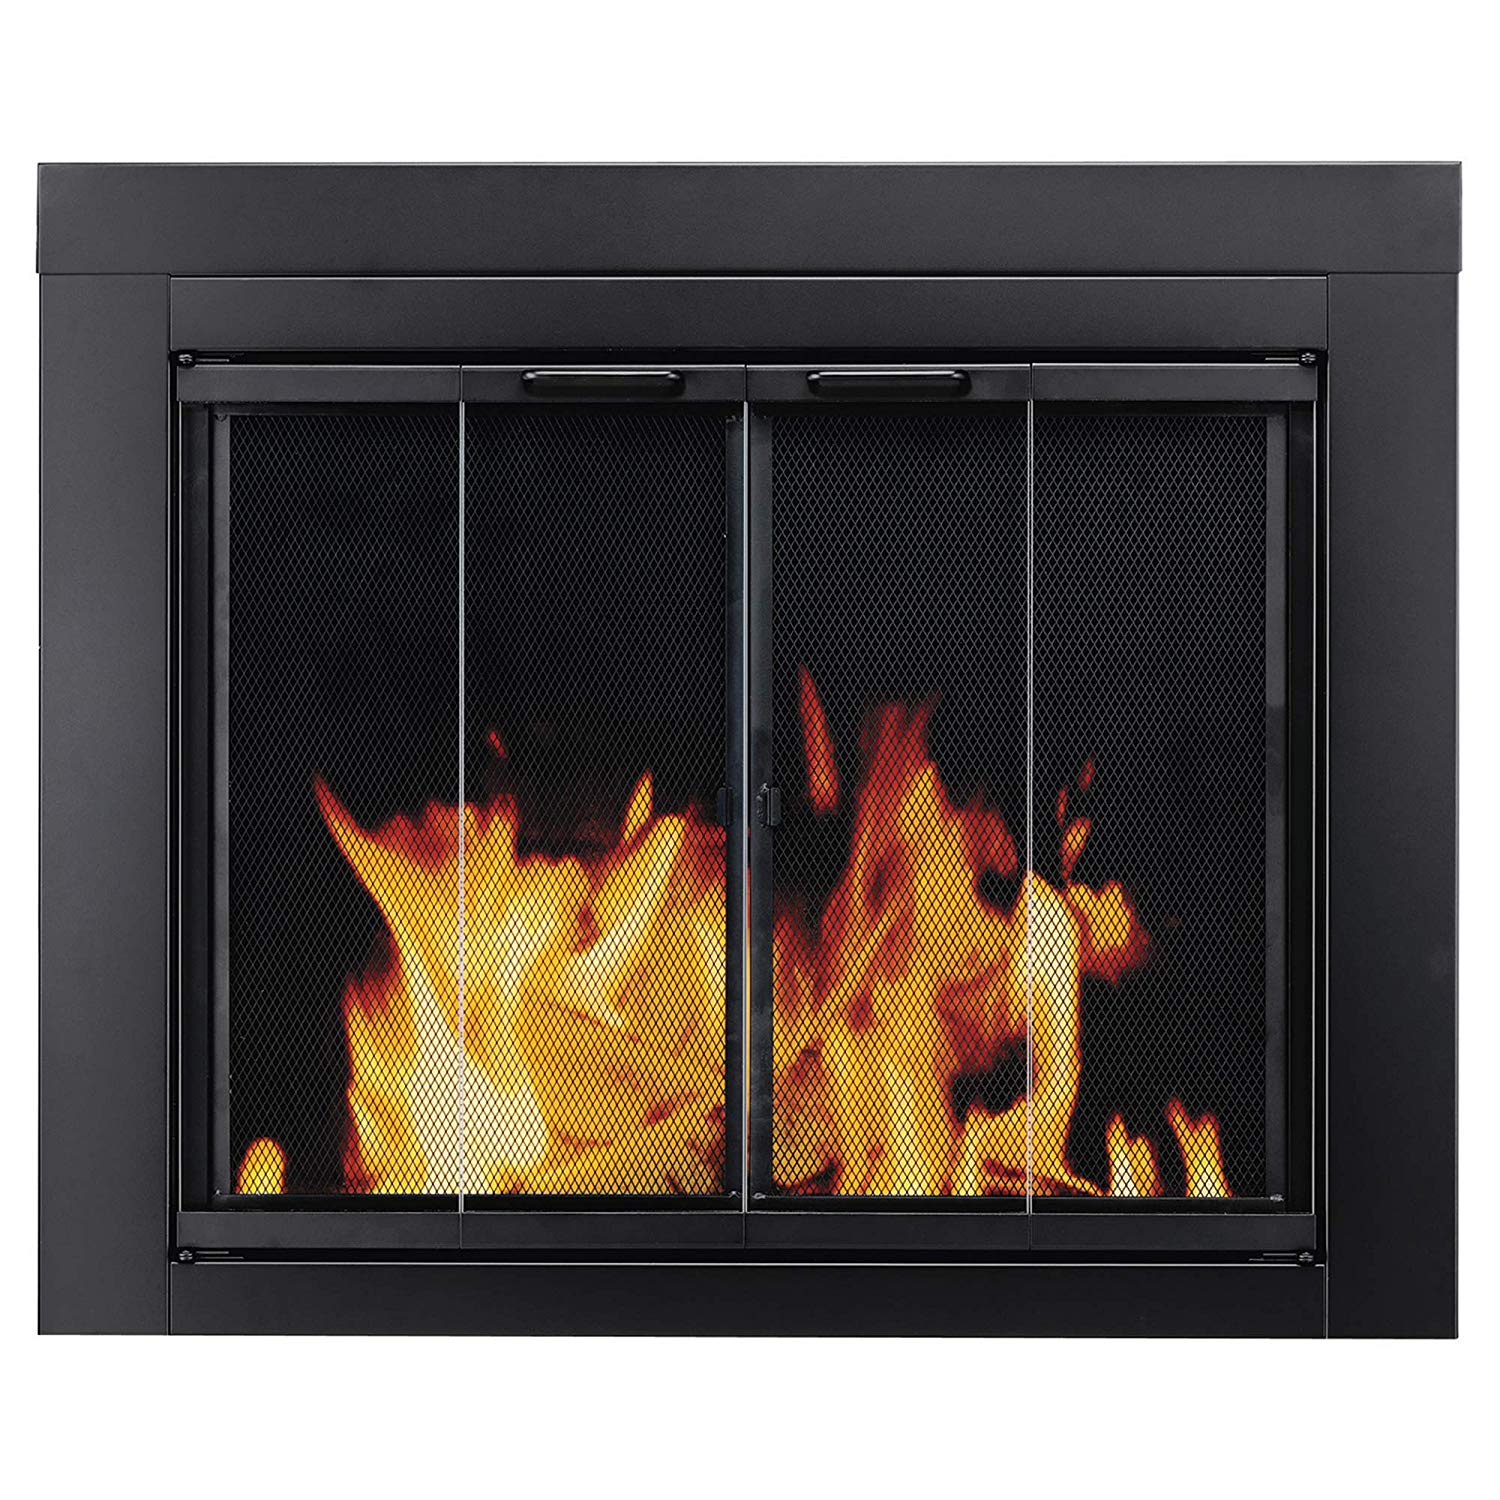 Gas Fireplace Companies Elegant Pleasant Hearth at 1000 ascot Fireplace Glass Door Black Small